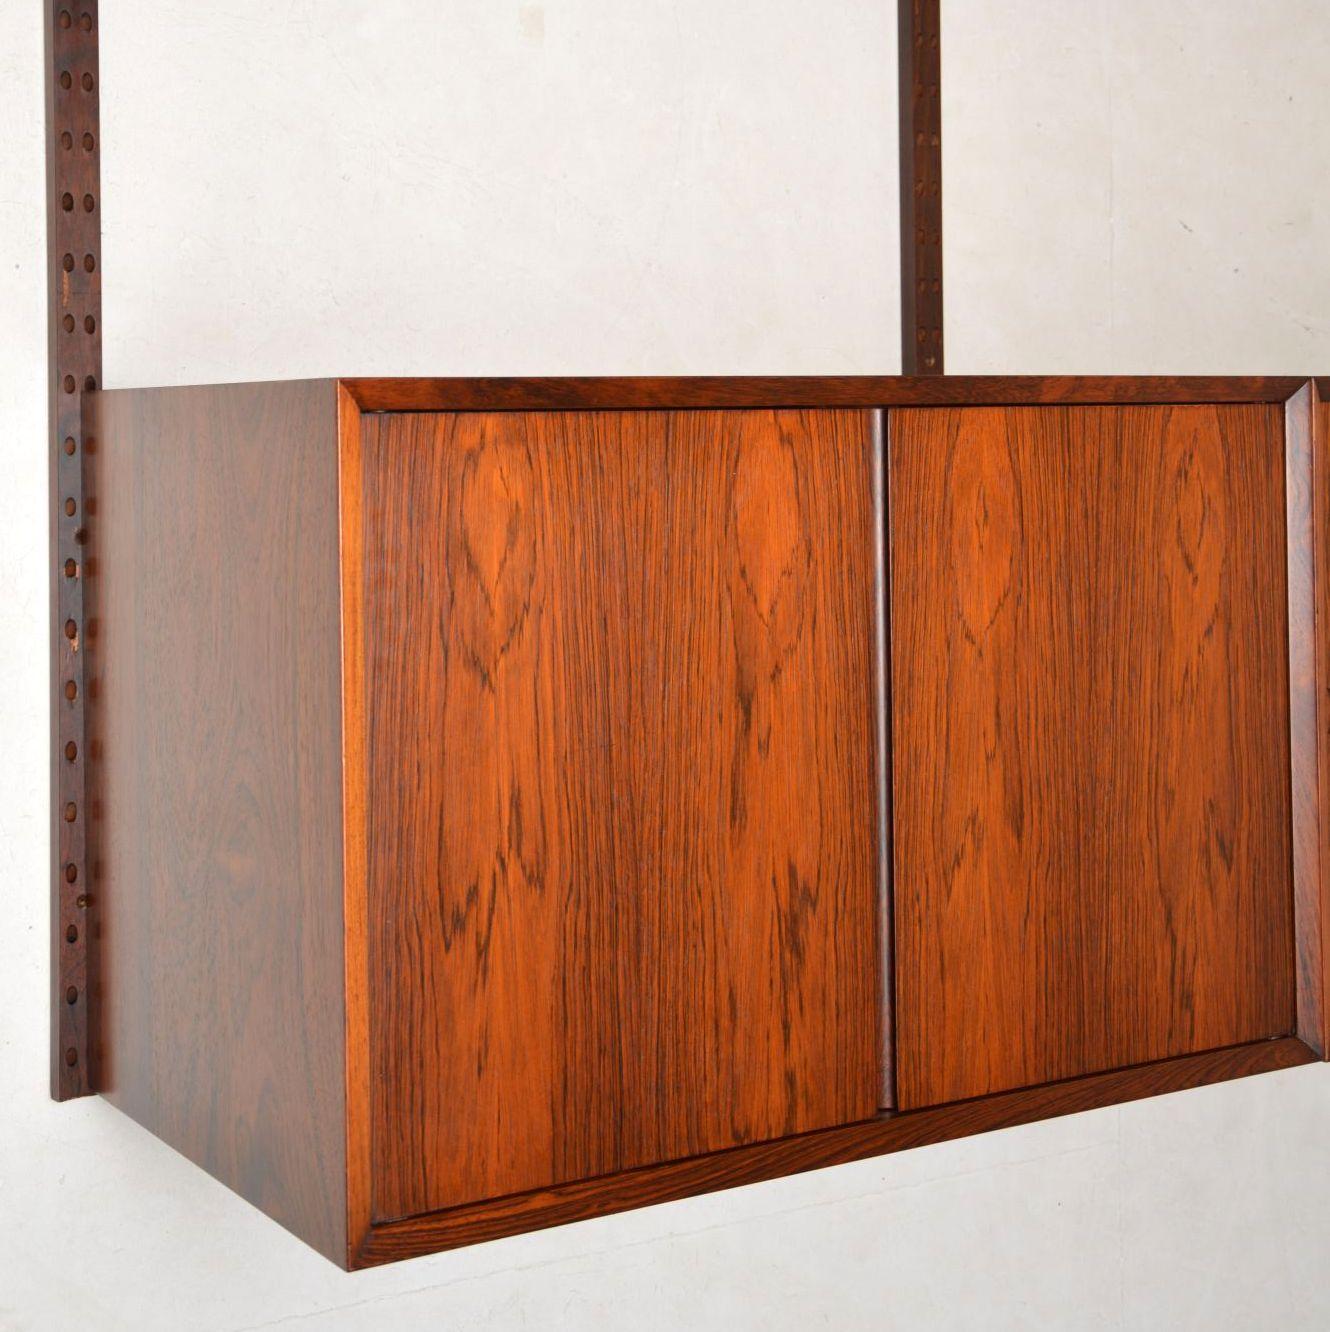 A superb vintage Danish wall unit. This is the Royal shelving system designed by Poul Cadovius, this was made by Cado in the 1960s. The quality is amazing, the vertical rails must be screwed to a wall, then the cabinets and shelves can be hung and